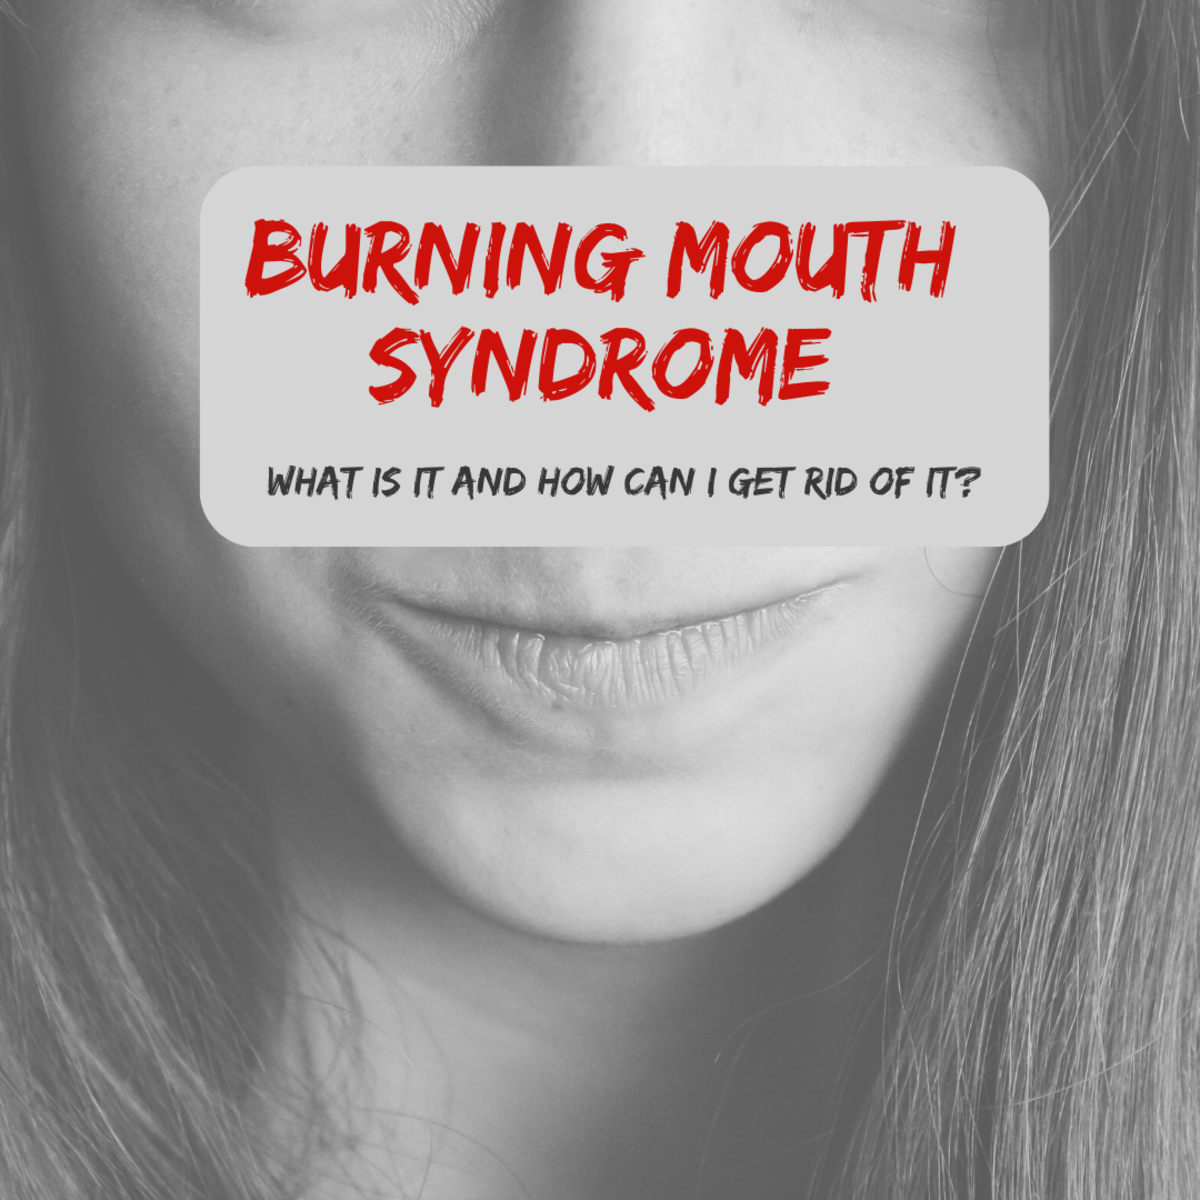 My Experience With Burning Mouth Syndrome (Yes, It's Real)